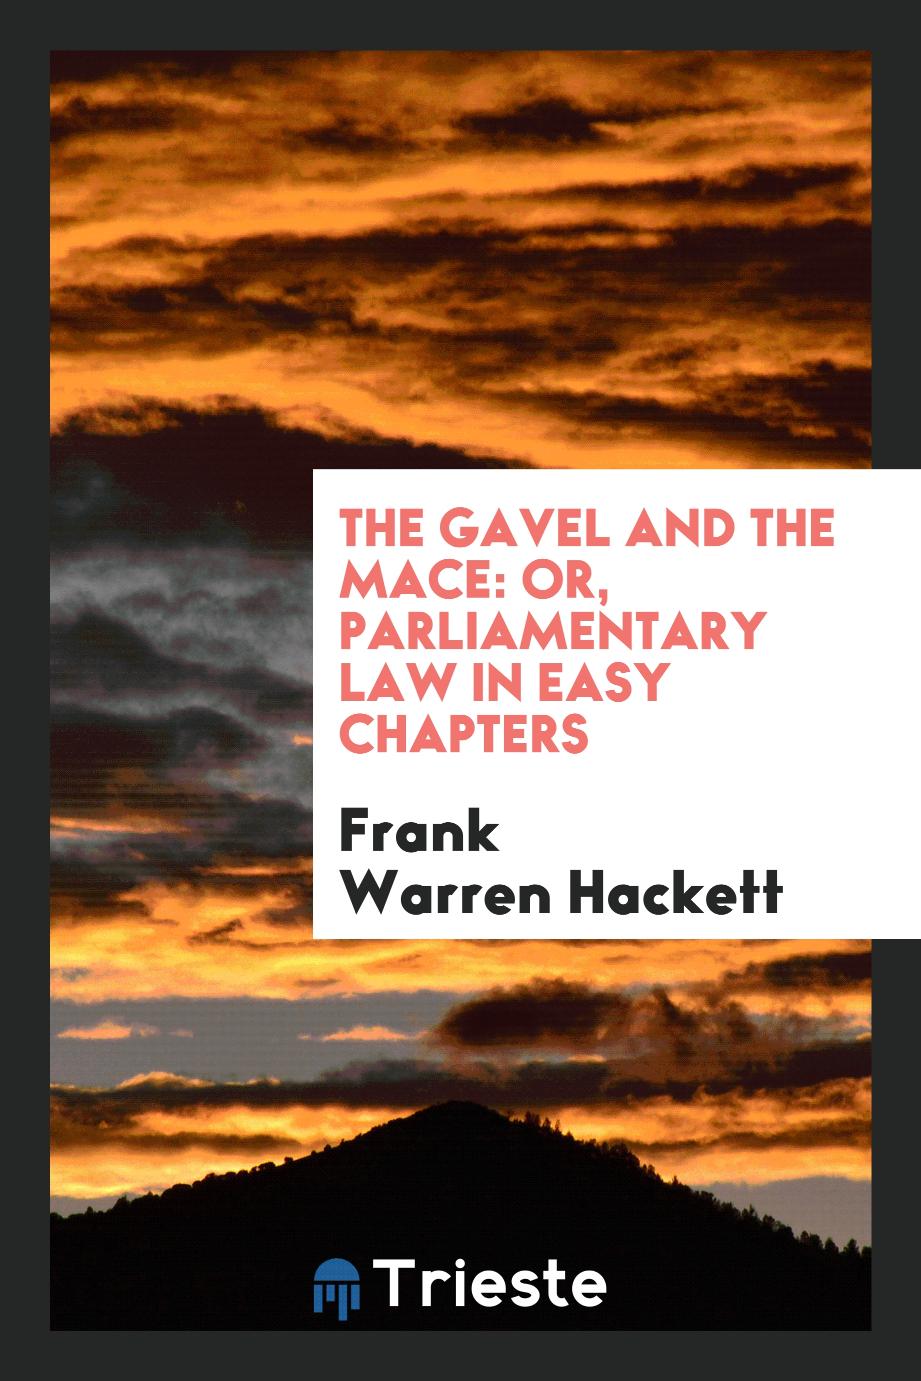 The Gavel and the Mace: Or, Parliamentary Law in Easy Chapters